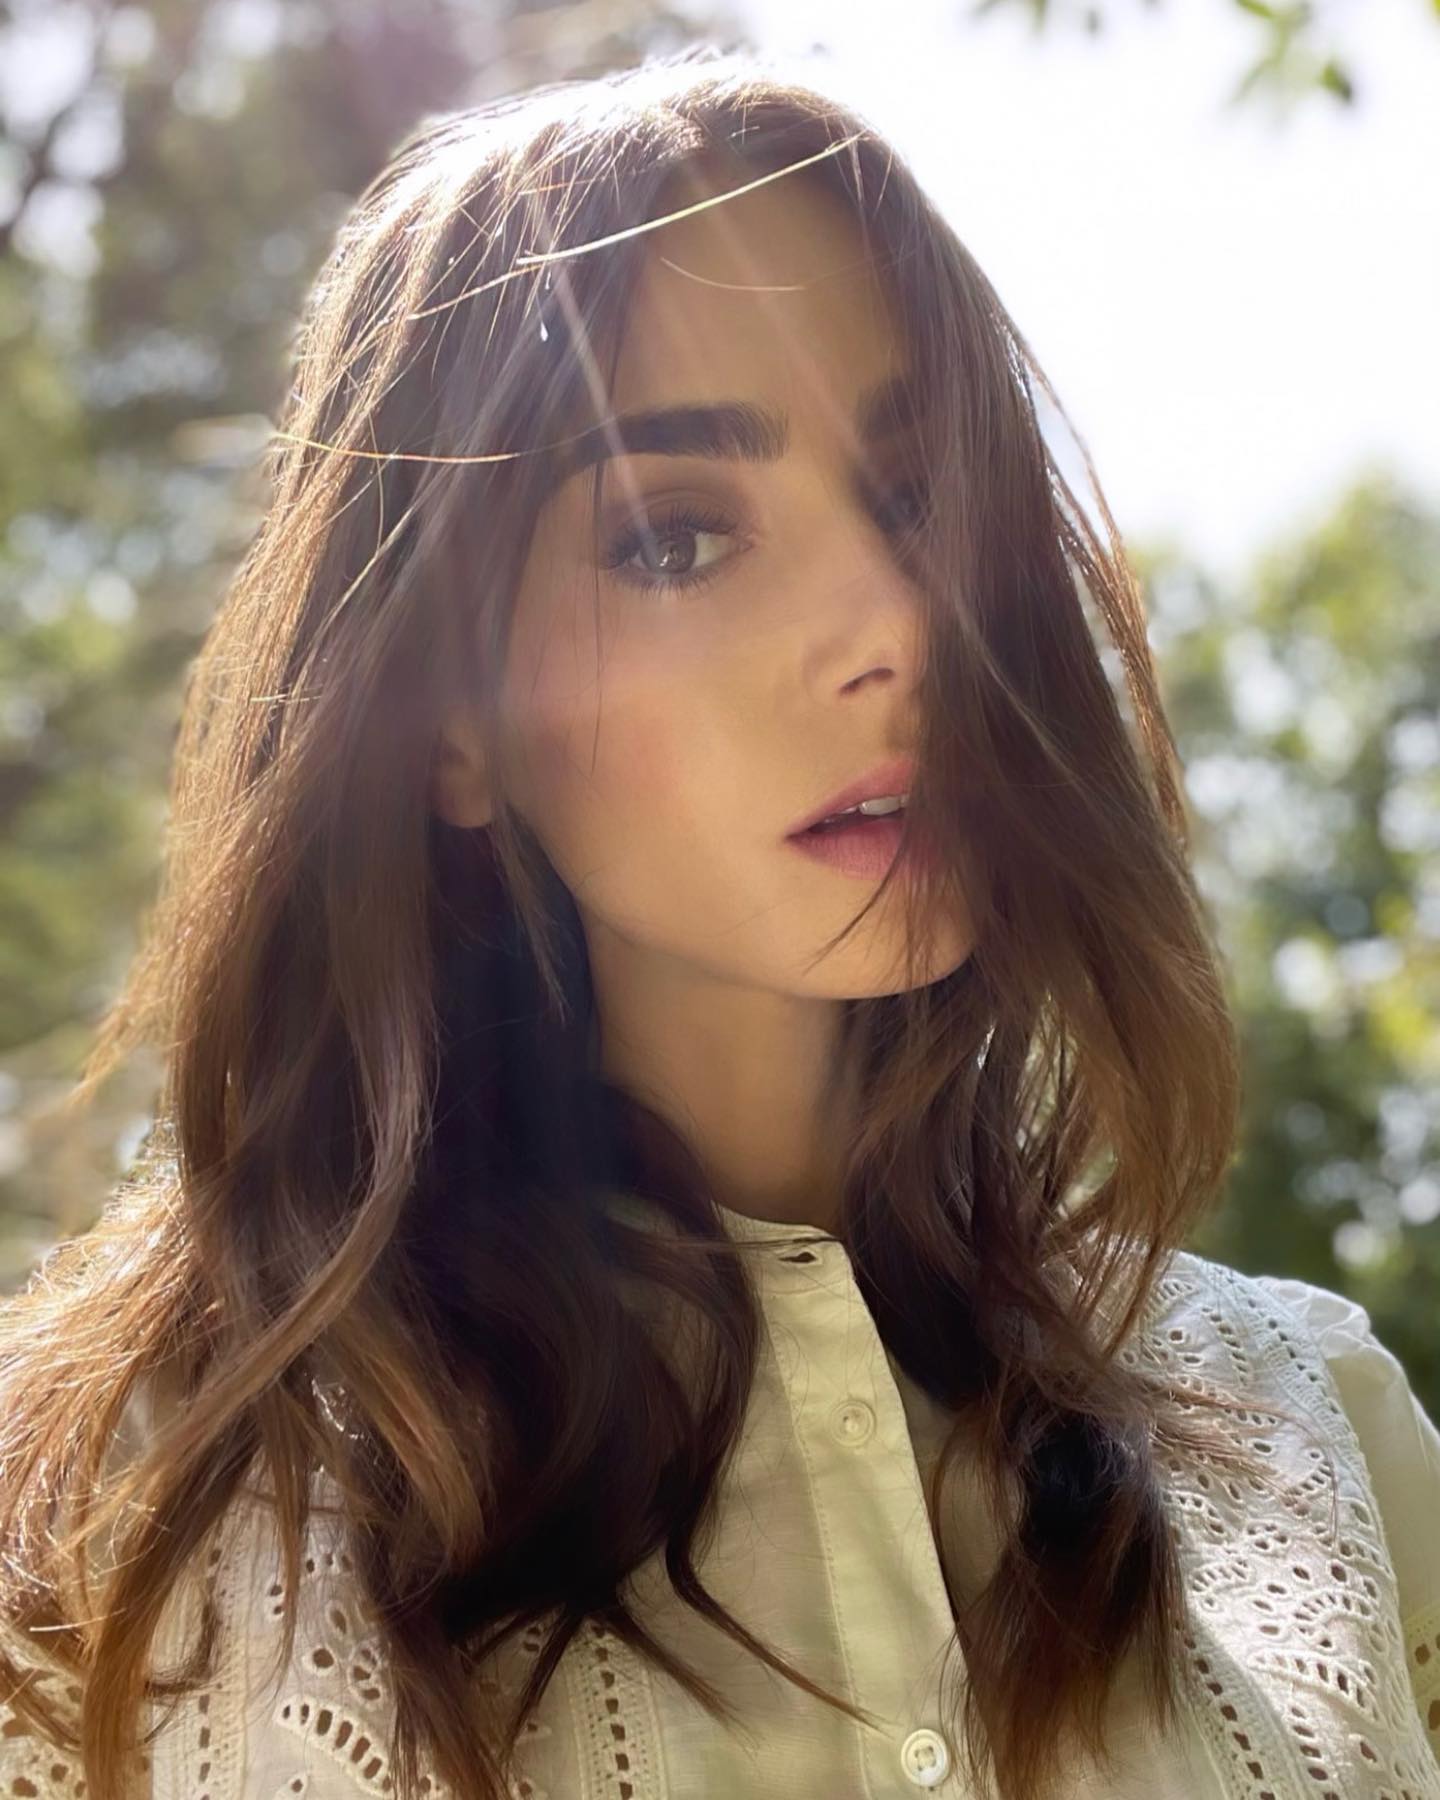 We Asked An Expert—These 5 Eyebrow Trends Will Be Huge in 2023: @LILYJCOLLINS